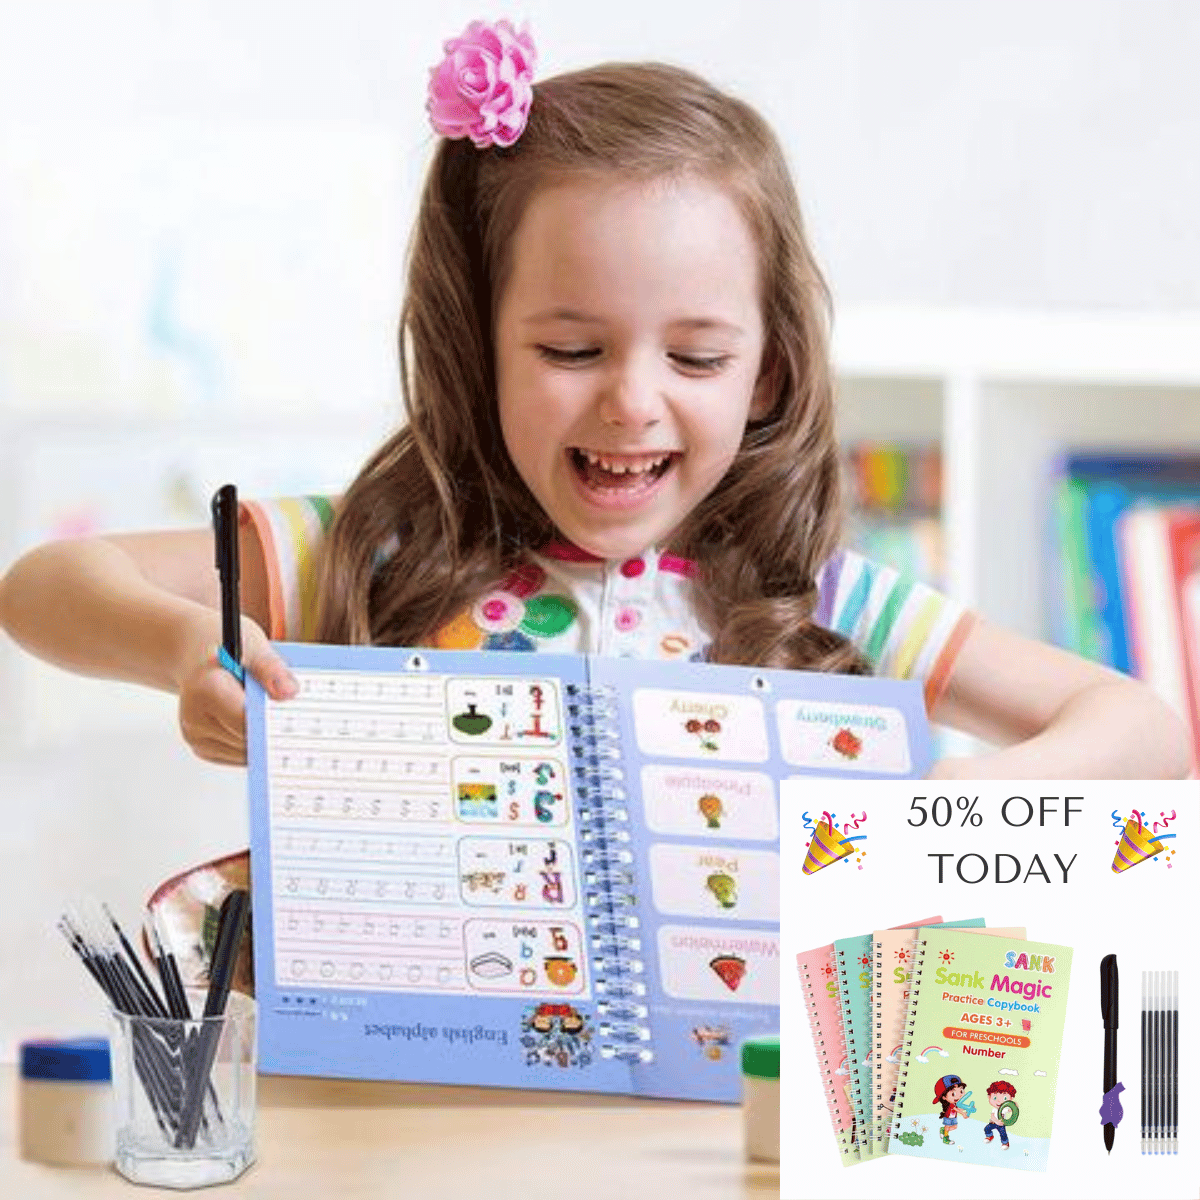 Kids Practice Magic Groove Writing Notebook Auto-Disappears in 10